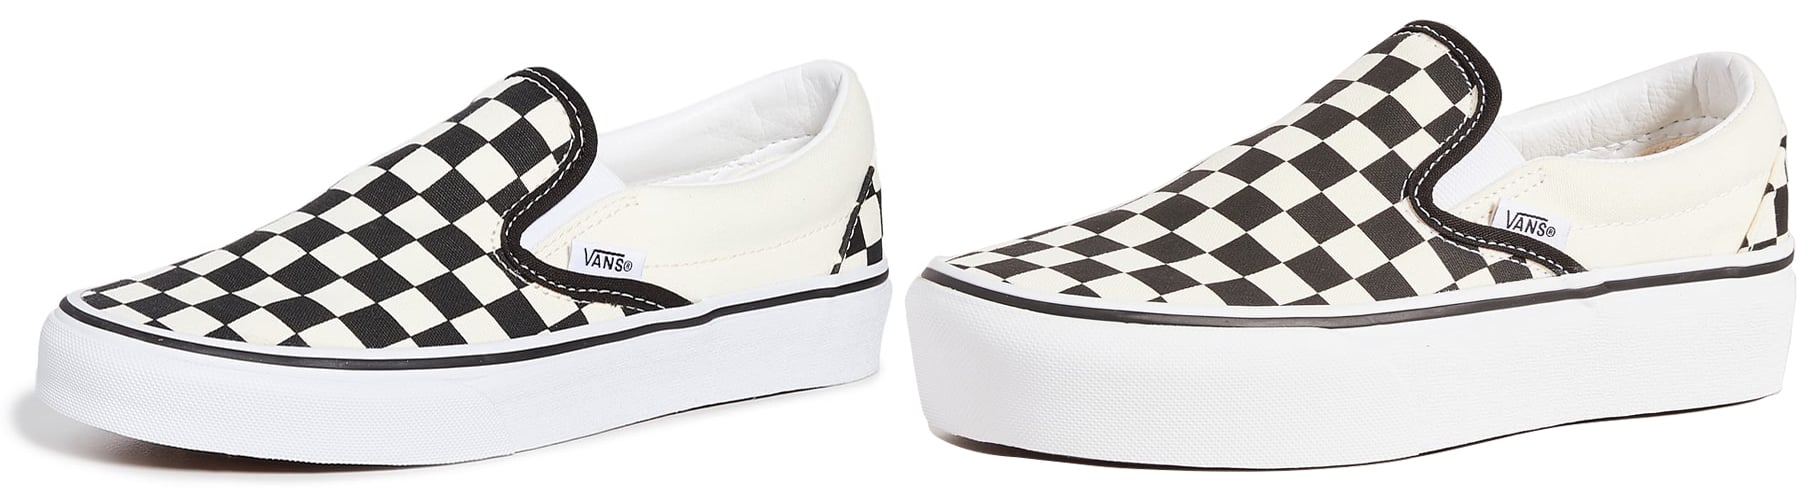 Vans' classic canvas slip-ons are perfect for laidback couples